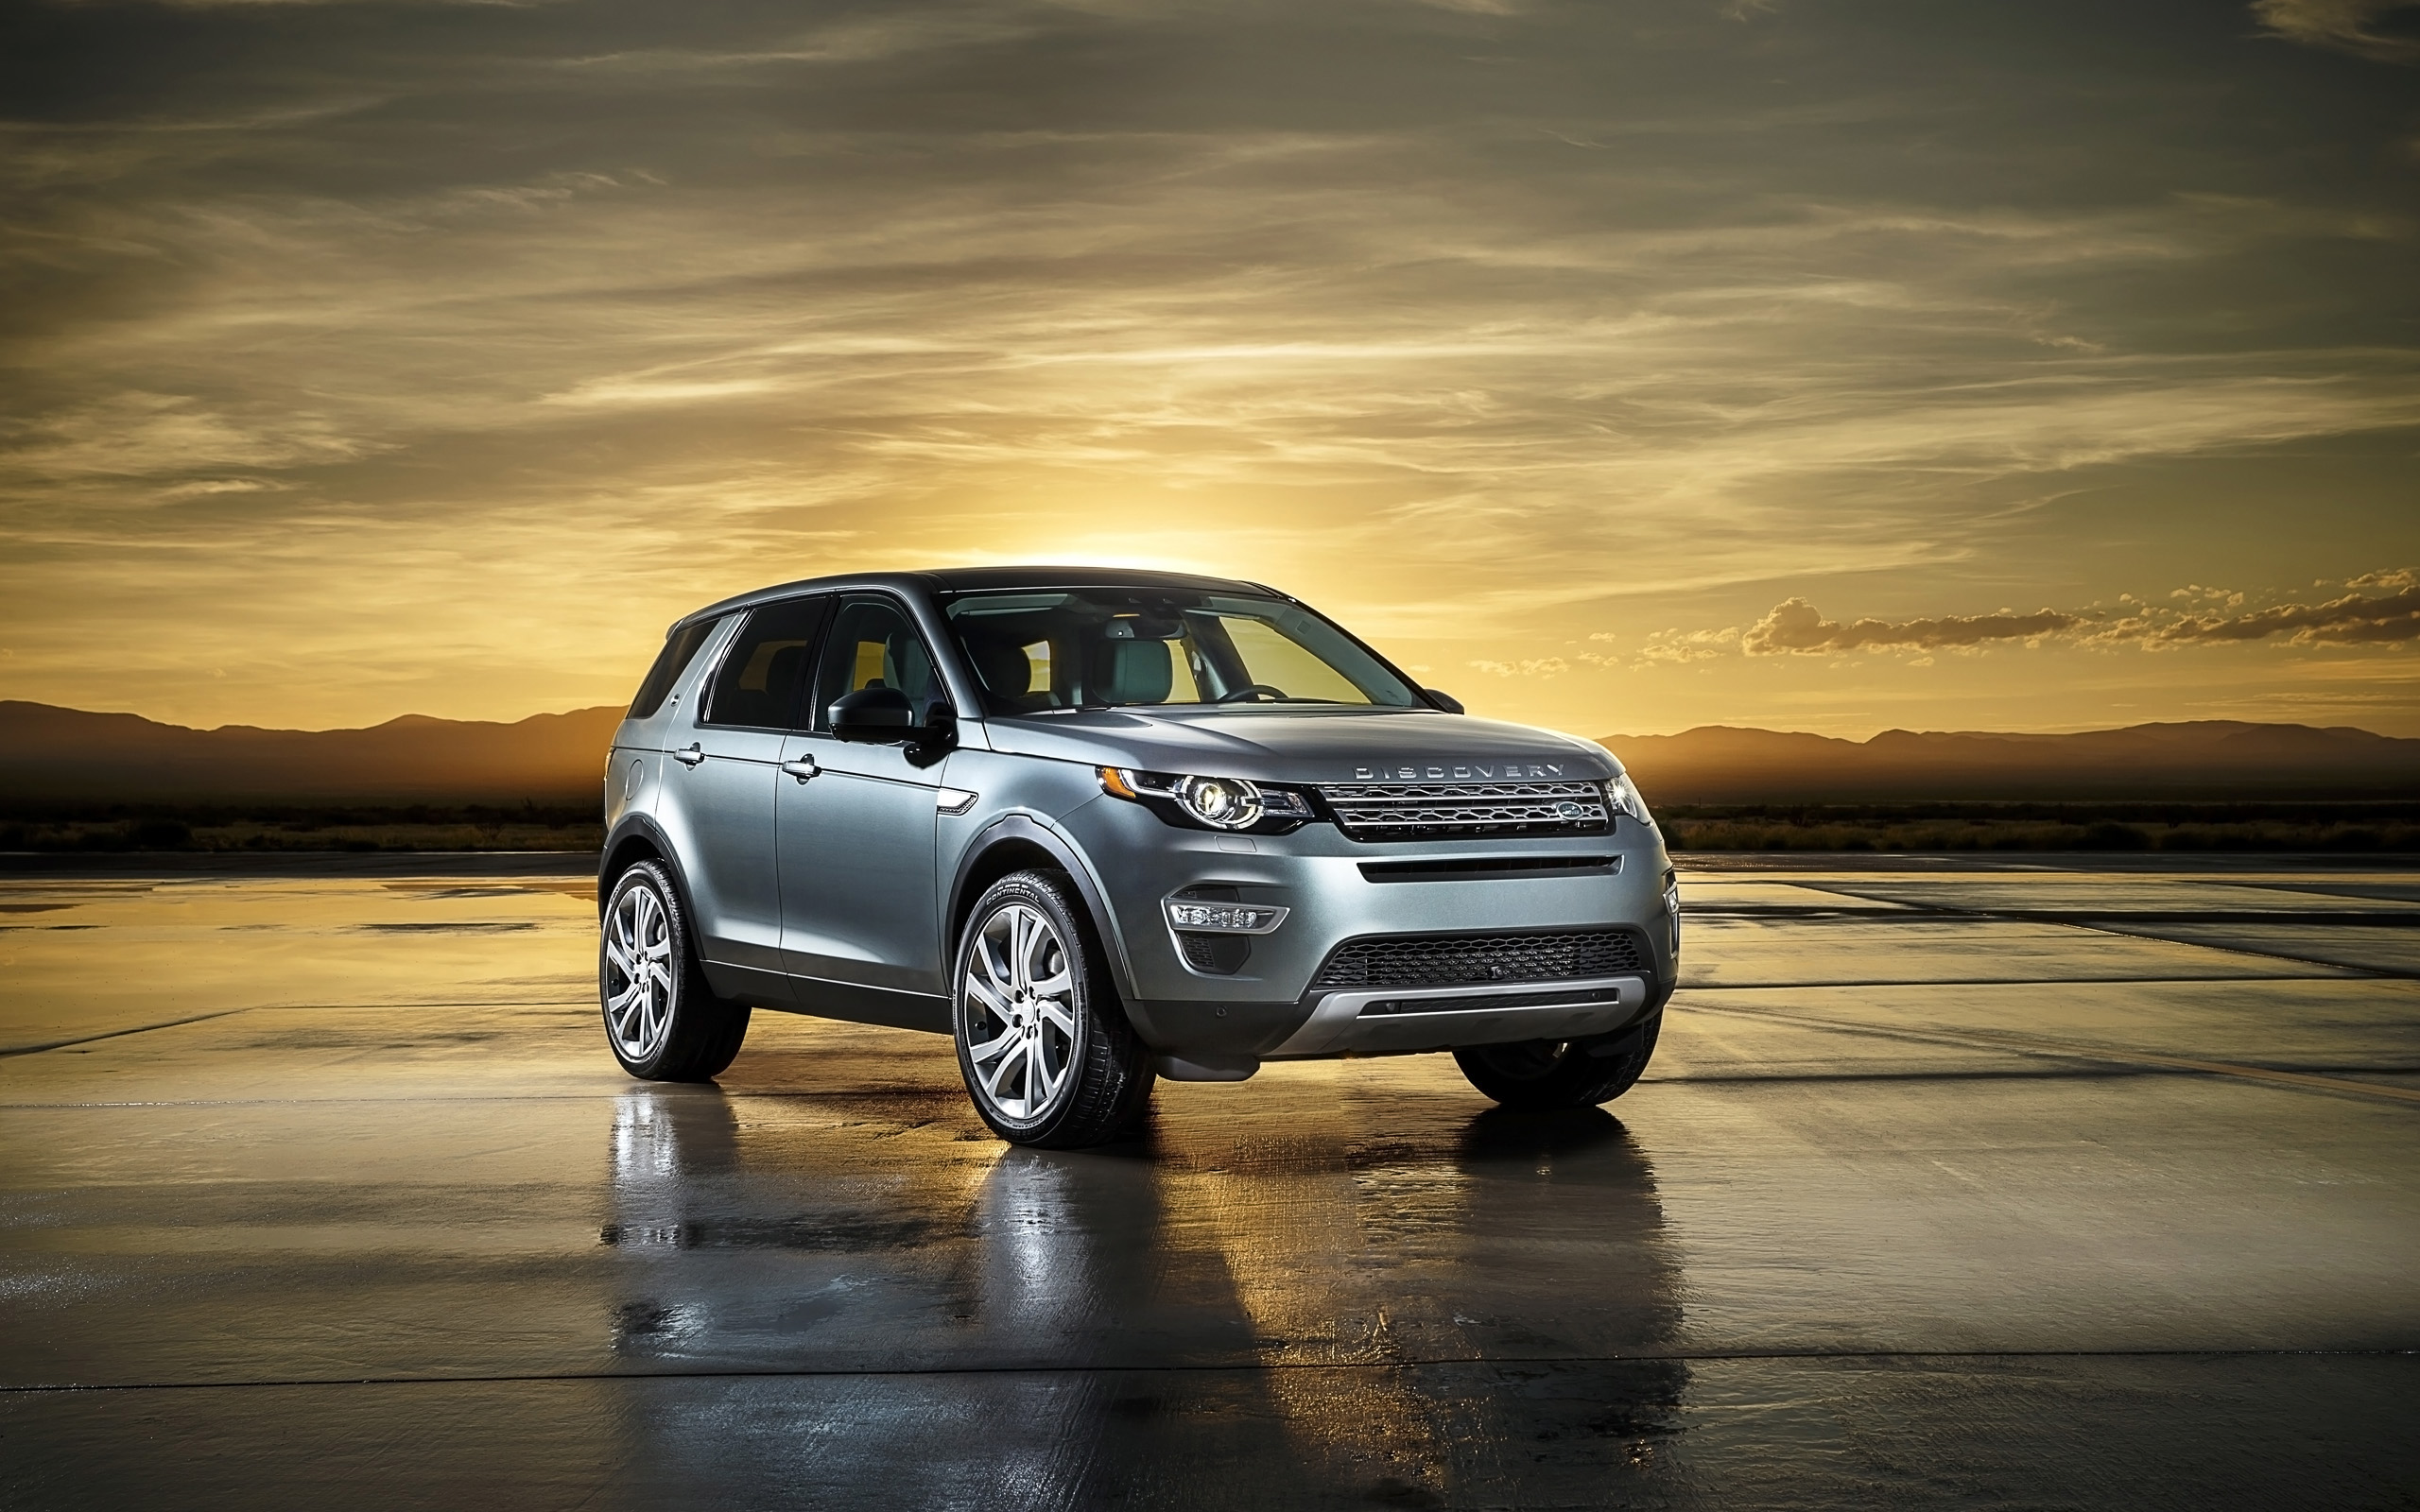 2015 Land Rover Discovery Sport 3 Wallpaper | HD Car Wallpapers | ID #4780